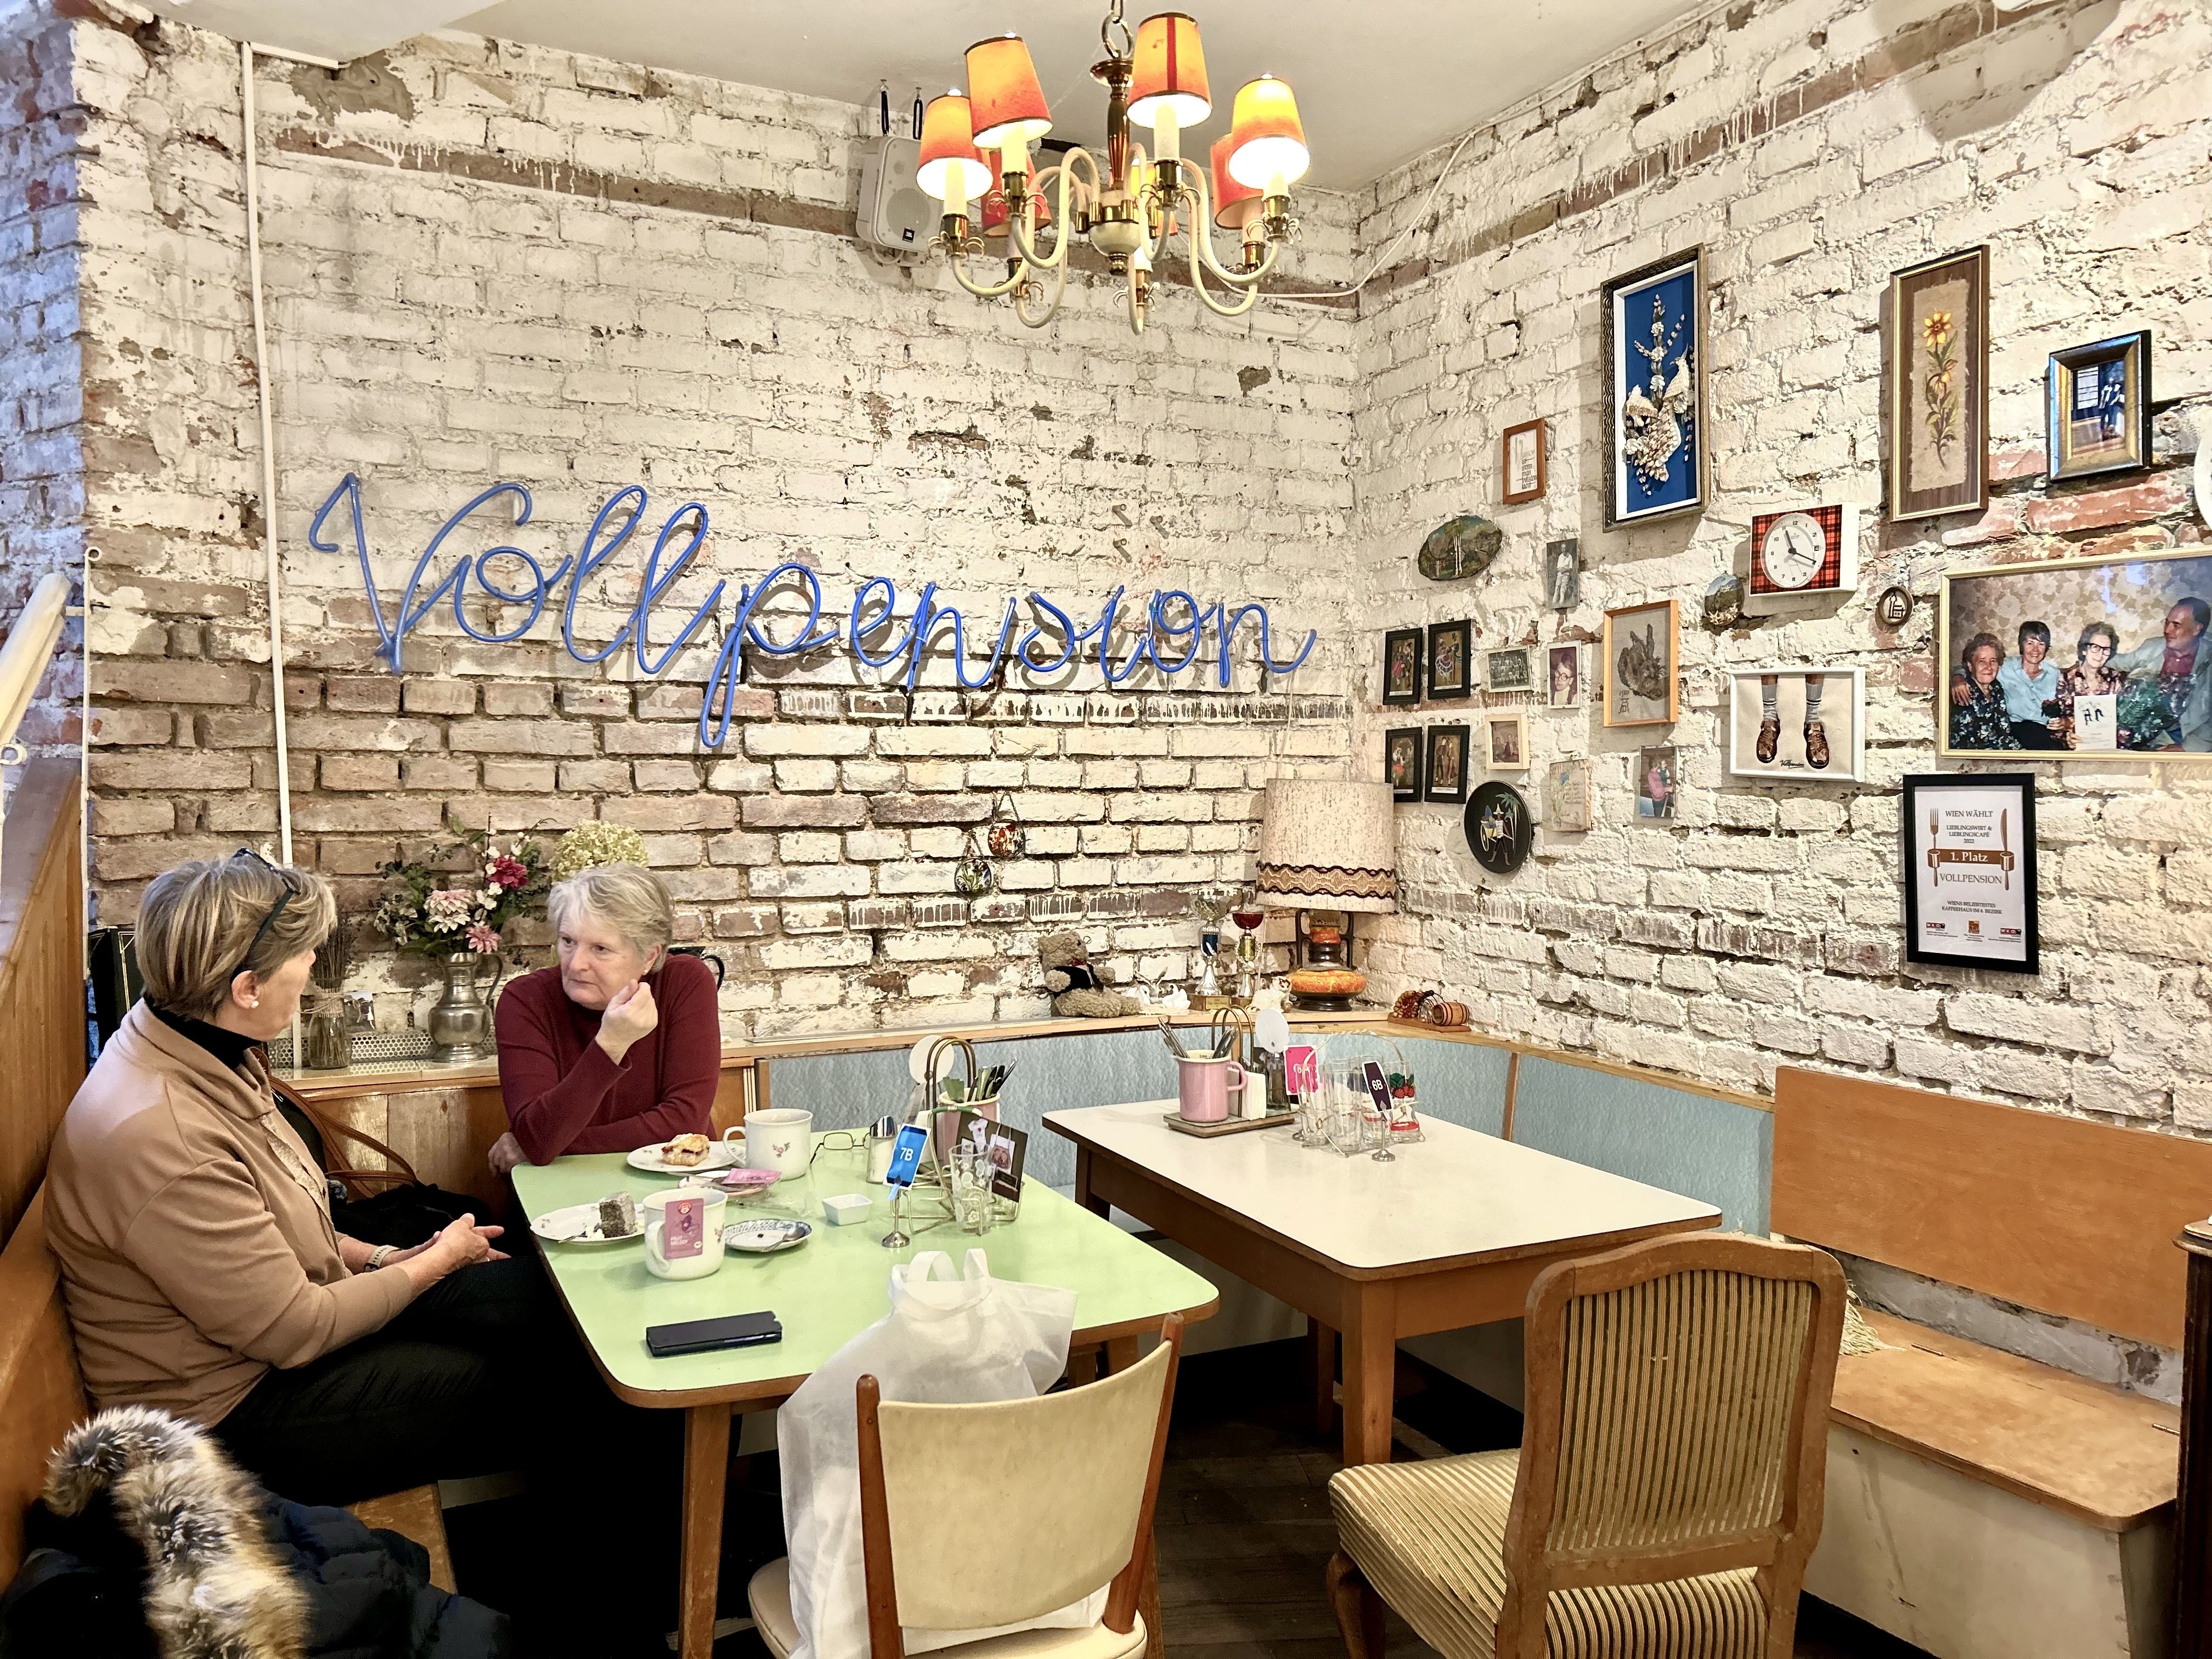 The Vollpension Cafe in Vienna’s ninth district offers a unique blend of culinary expertise and social purpose. Photo: Handout